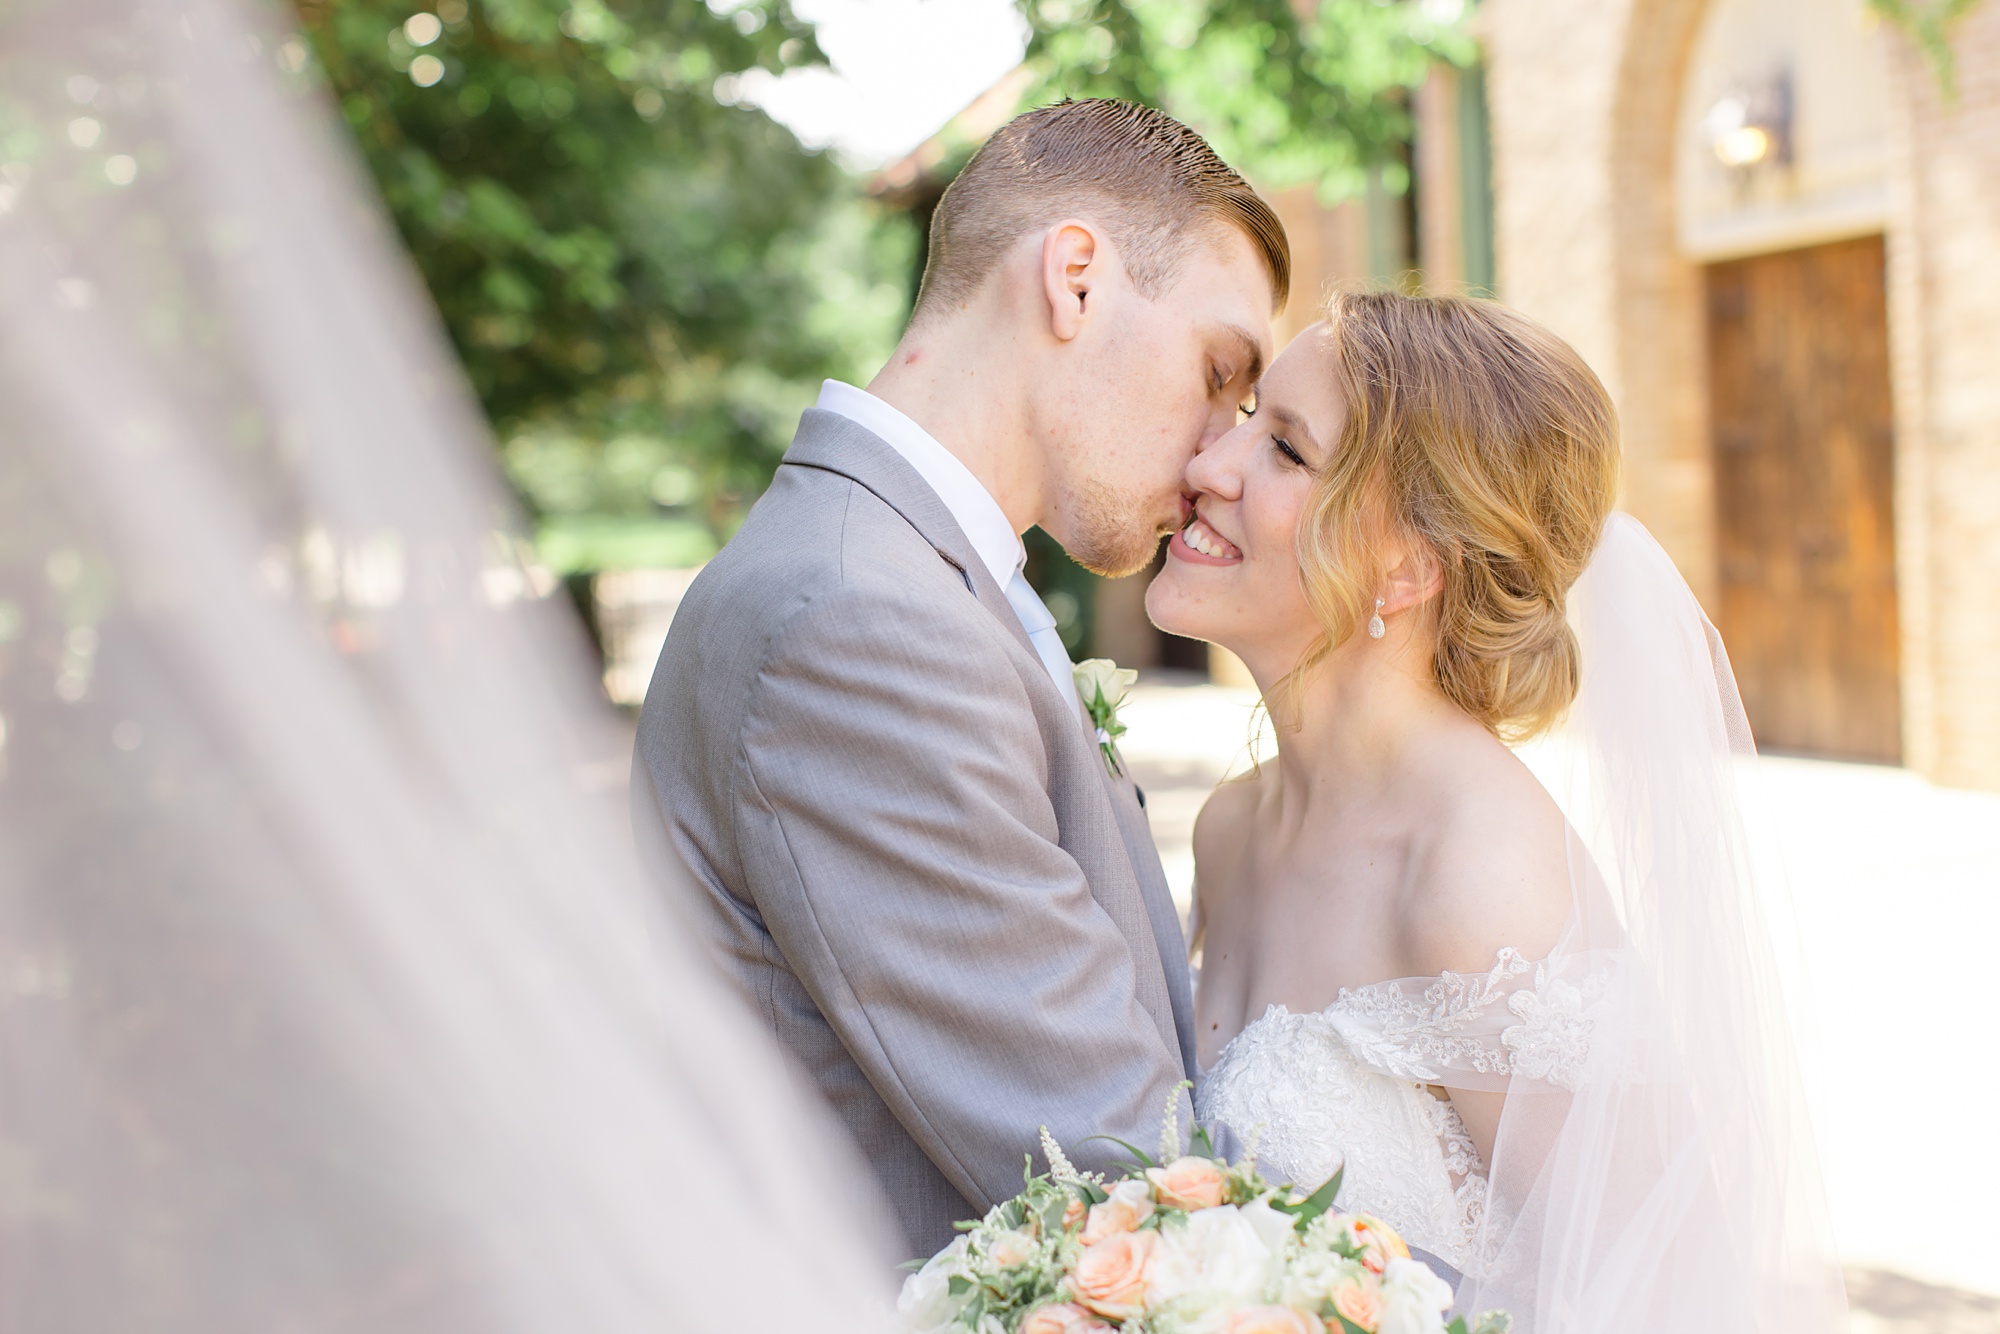 groom kisses bride's cheek while veil lifts around them